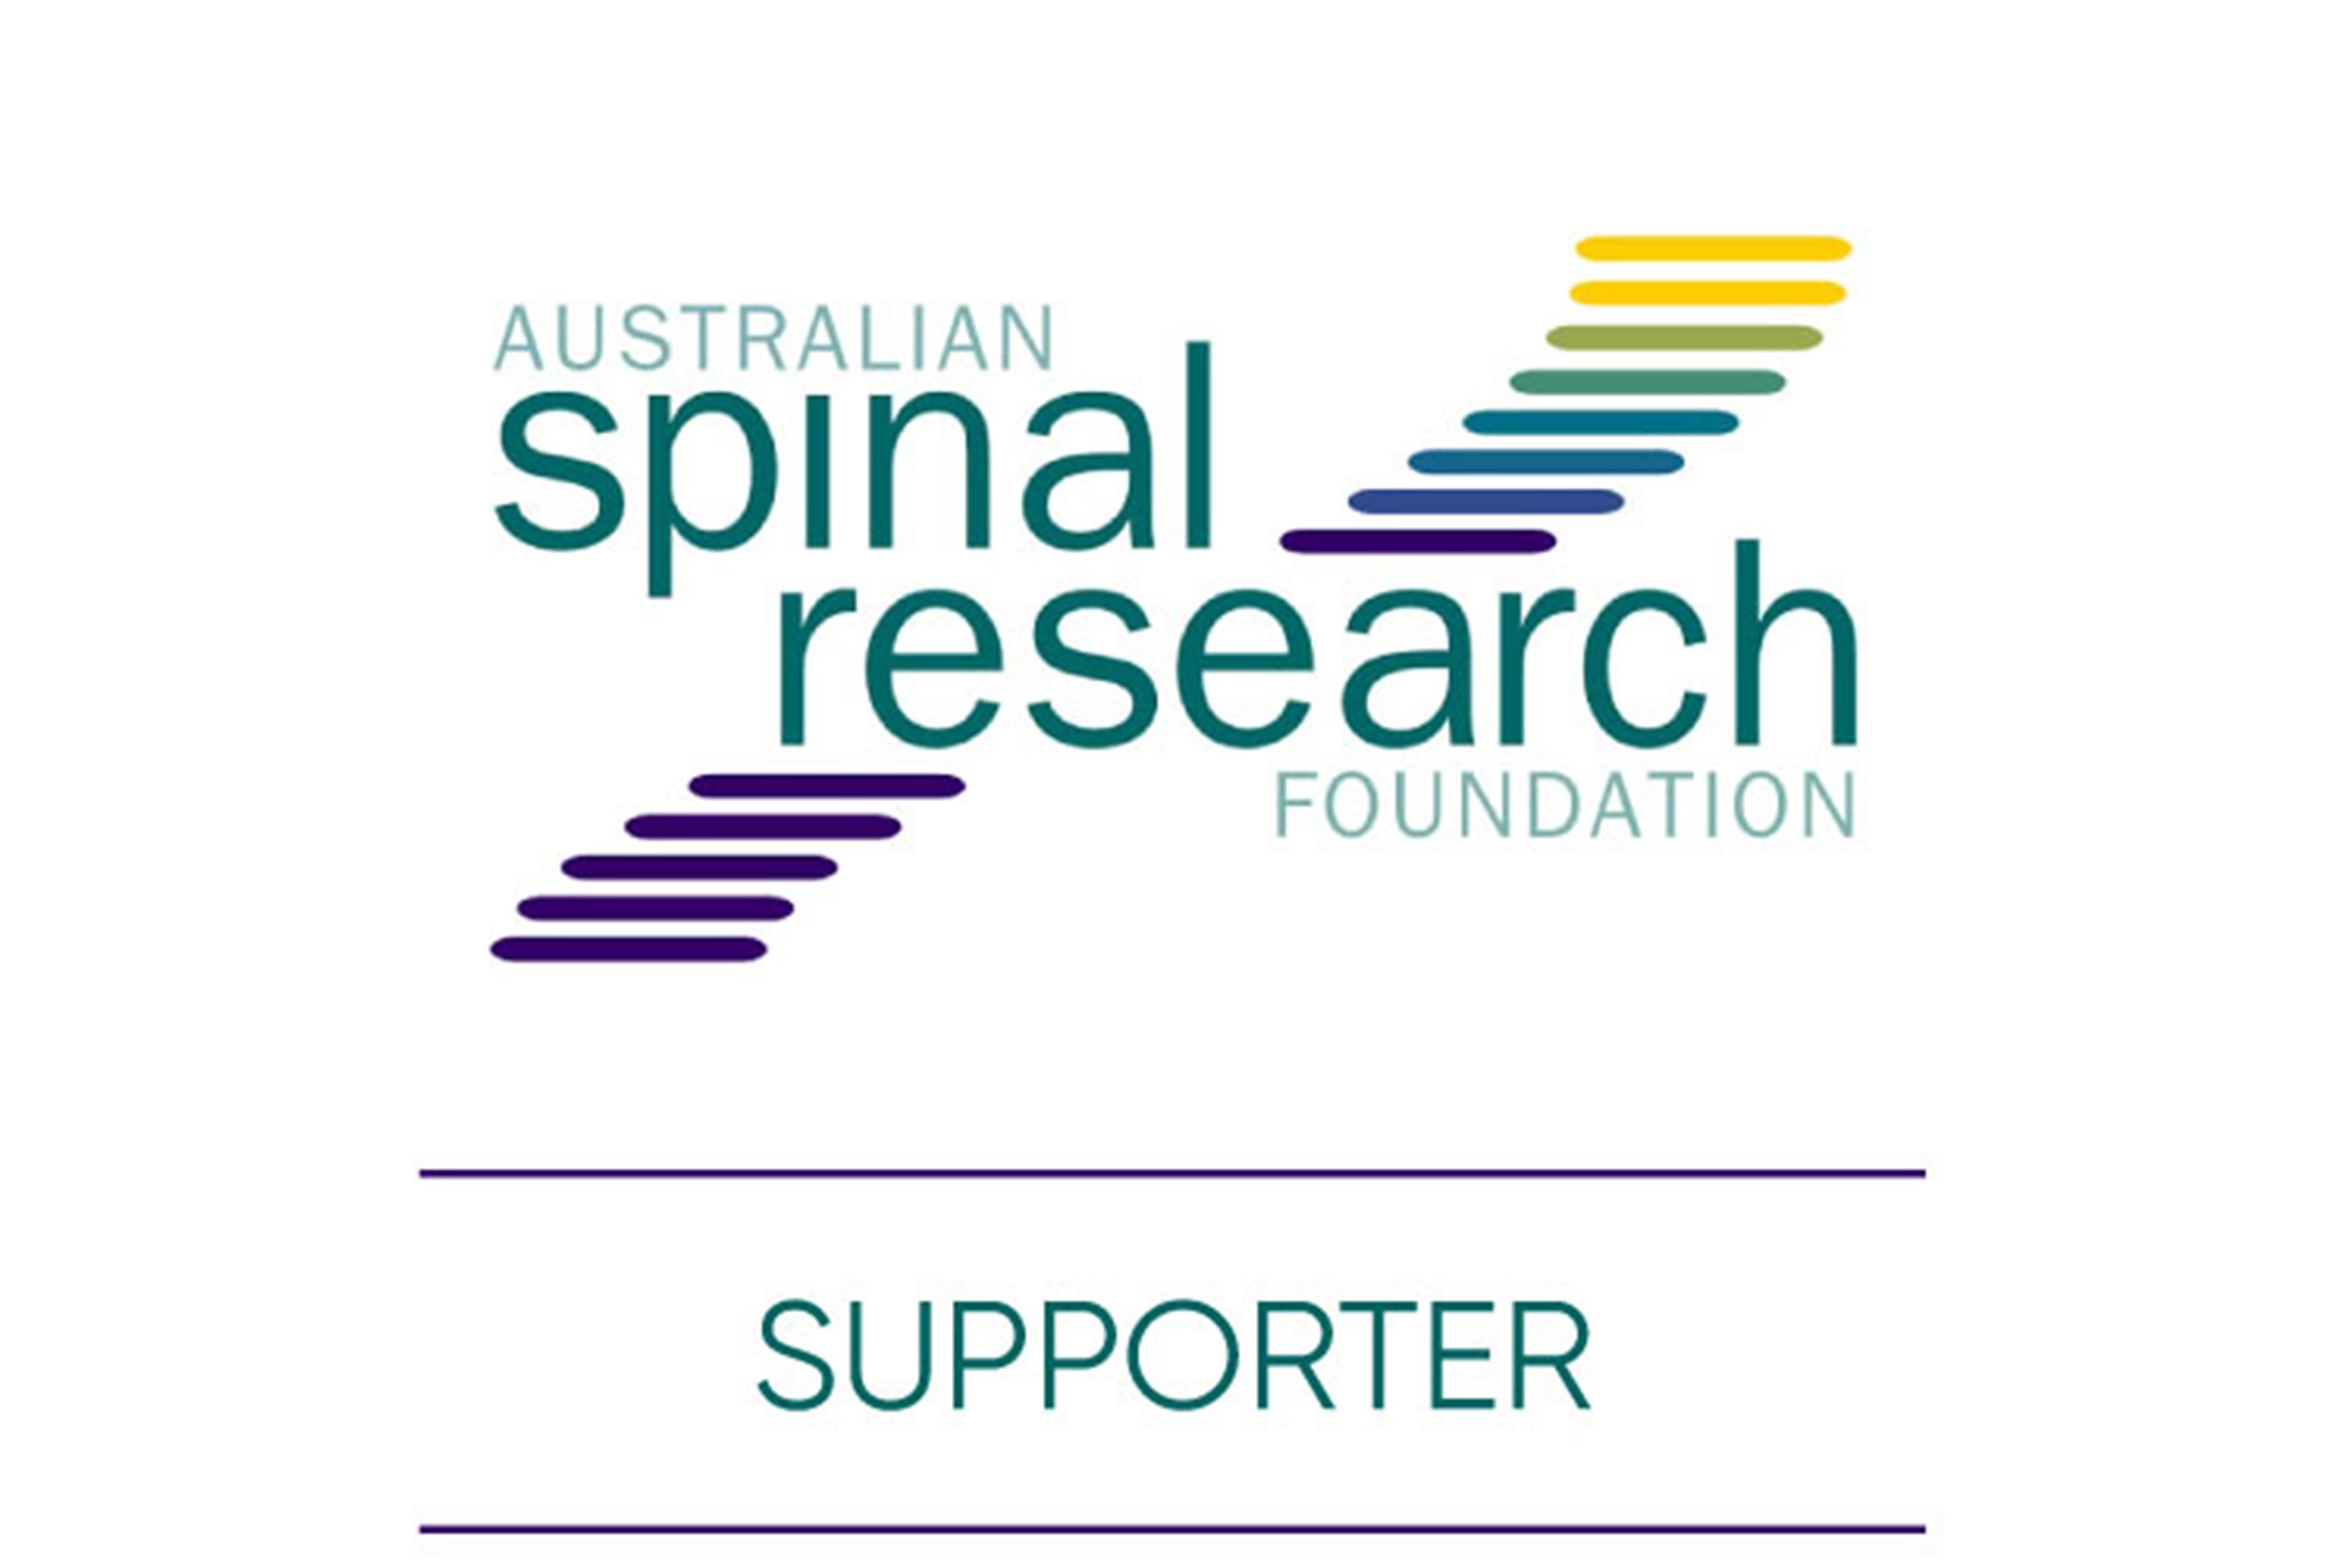 Australian Spinal Research Foundation Supporter